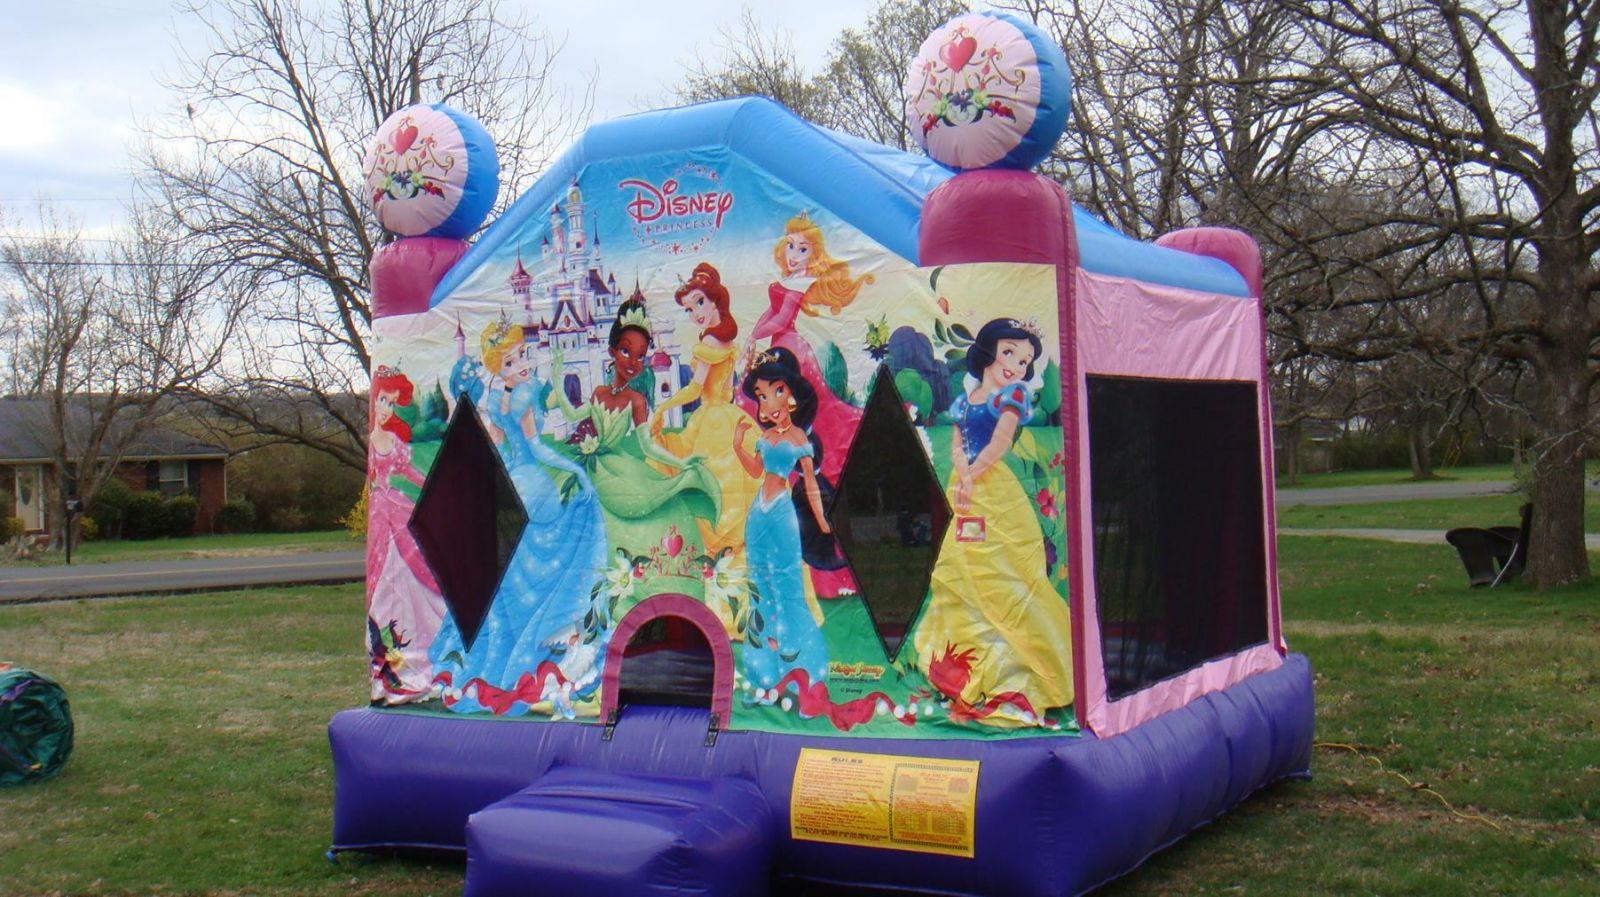 Disney princess bounce house for rent Nashville TN Jumping Hearts ParTy Rentals